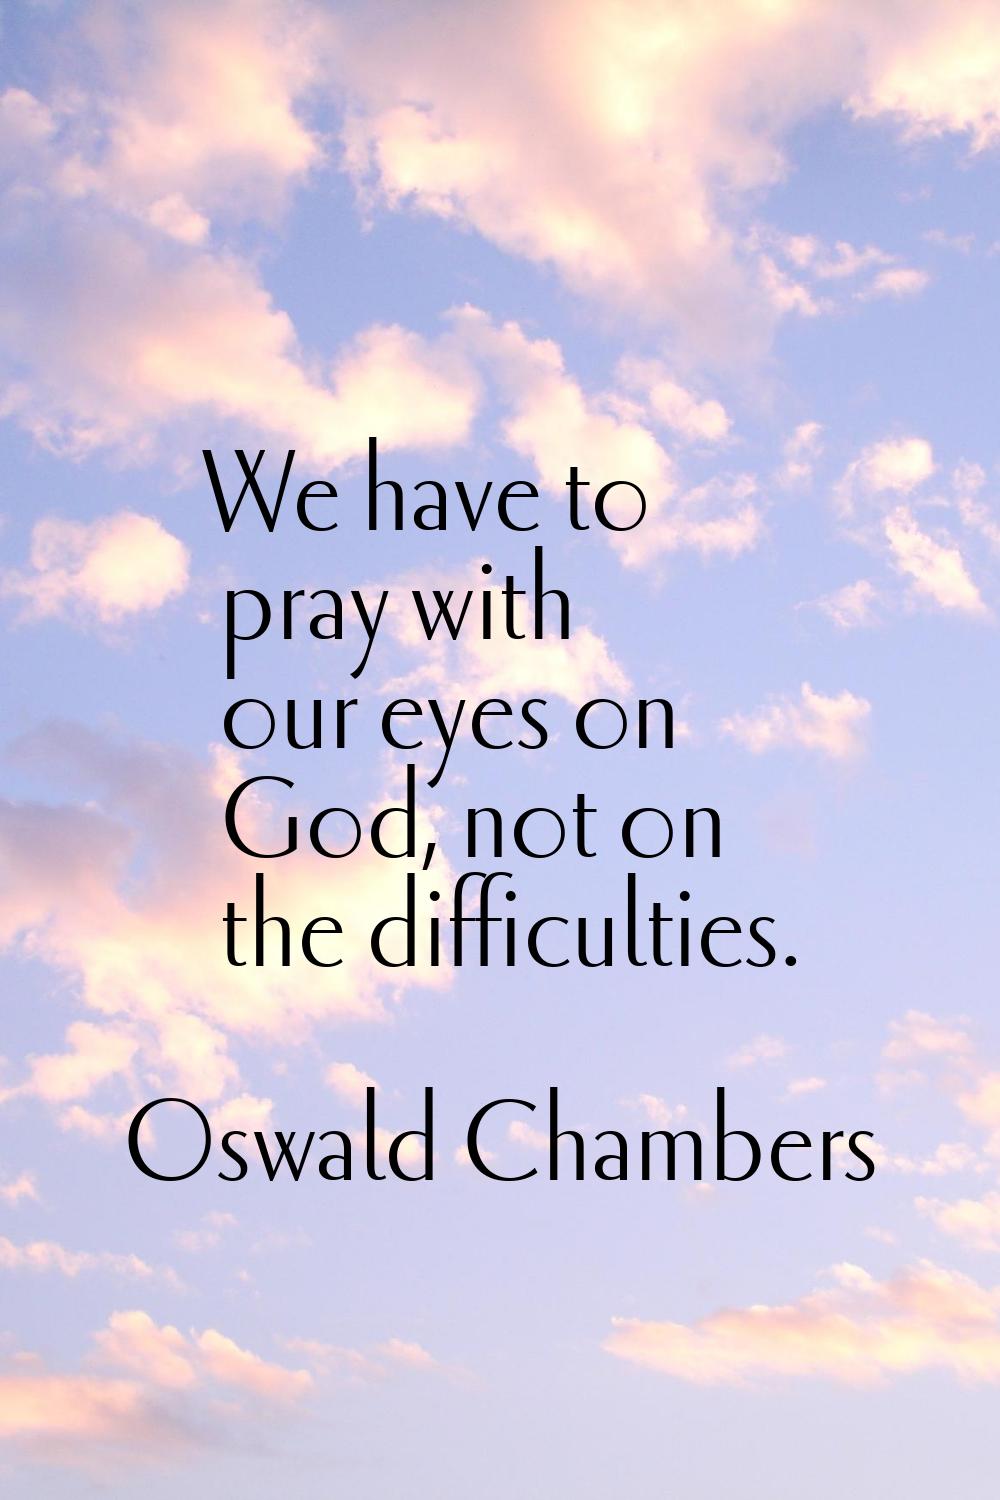 We have to pray with our eyes on God, not on the difficulties.